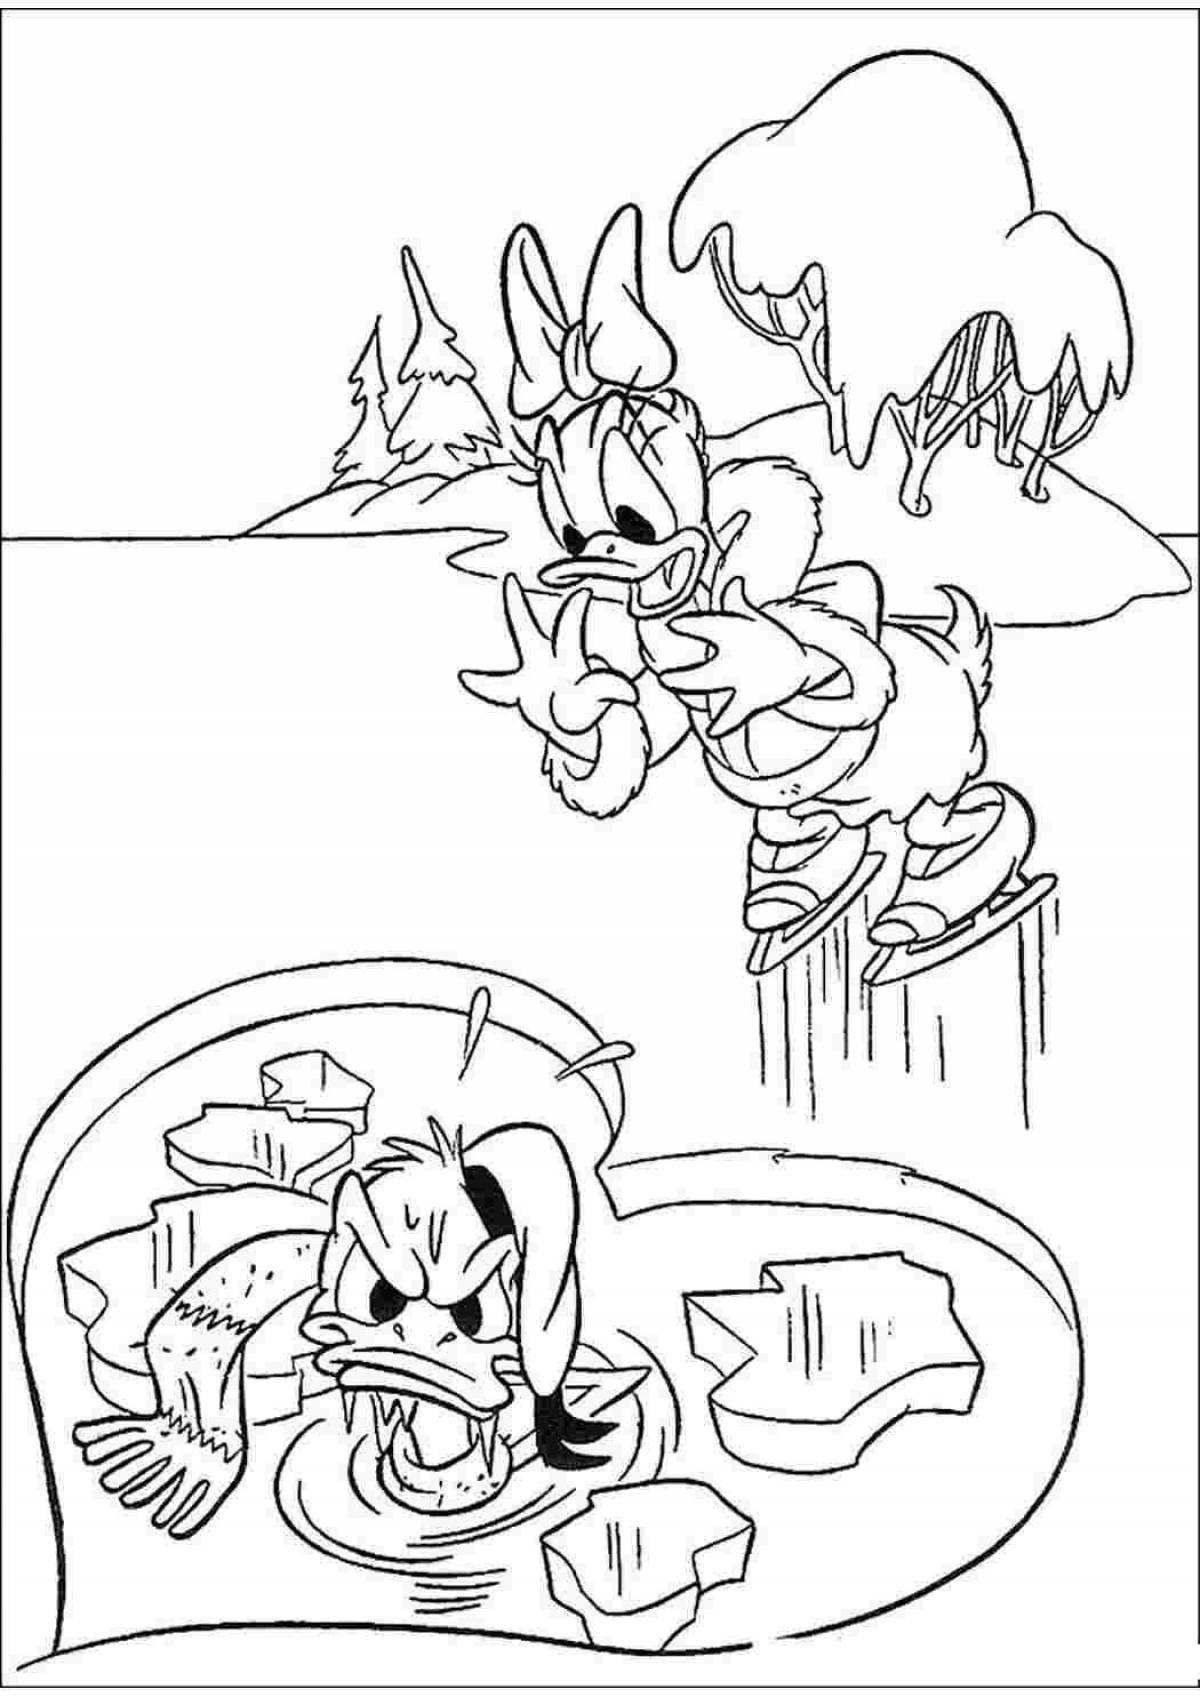 Exciting beware the ice coloring page